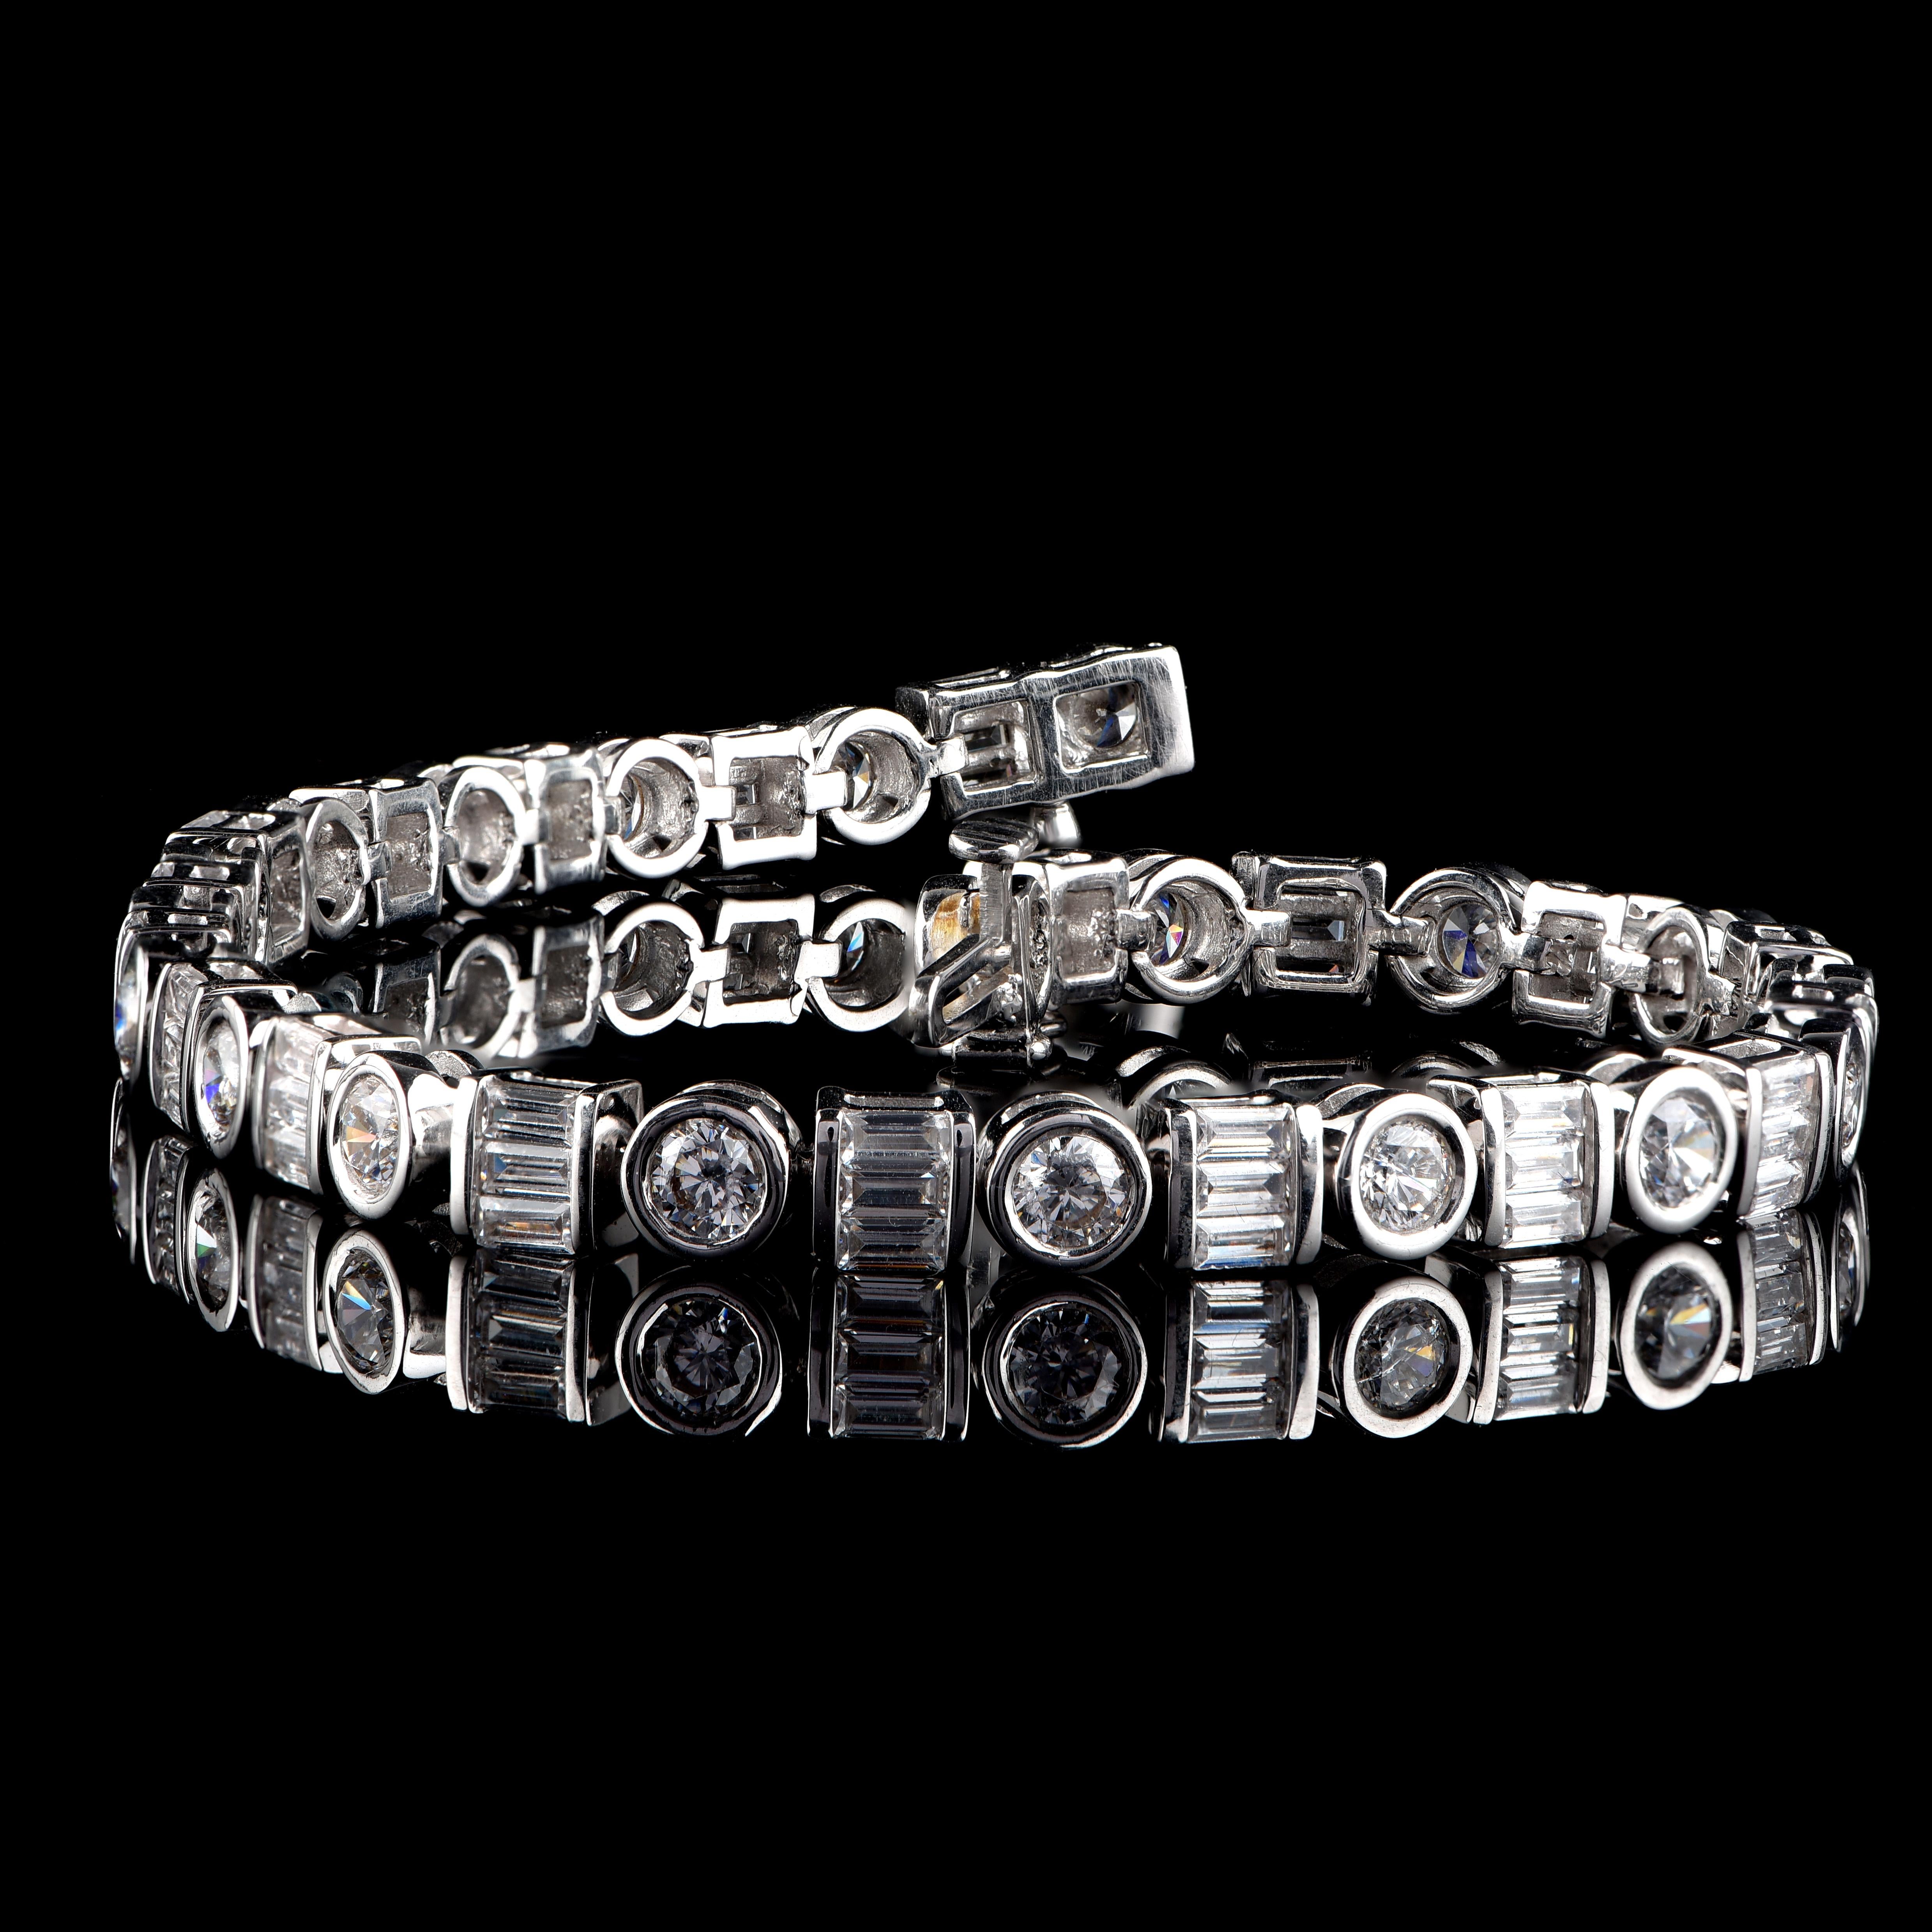 This stunning bracelet is perfect for everyday wear. It is studded with 80 brilliant cut and baguette cut diamonds in bezel & channel setting and crafted in 14 karat white gold. Diamond are graded H-I Color, I2 Clarity. Bracelet secures firmly with